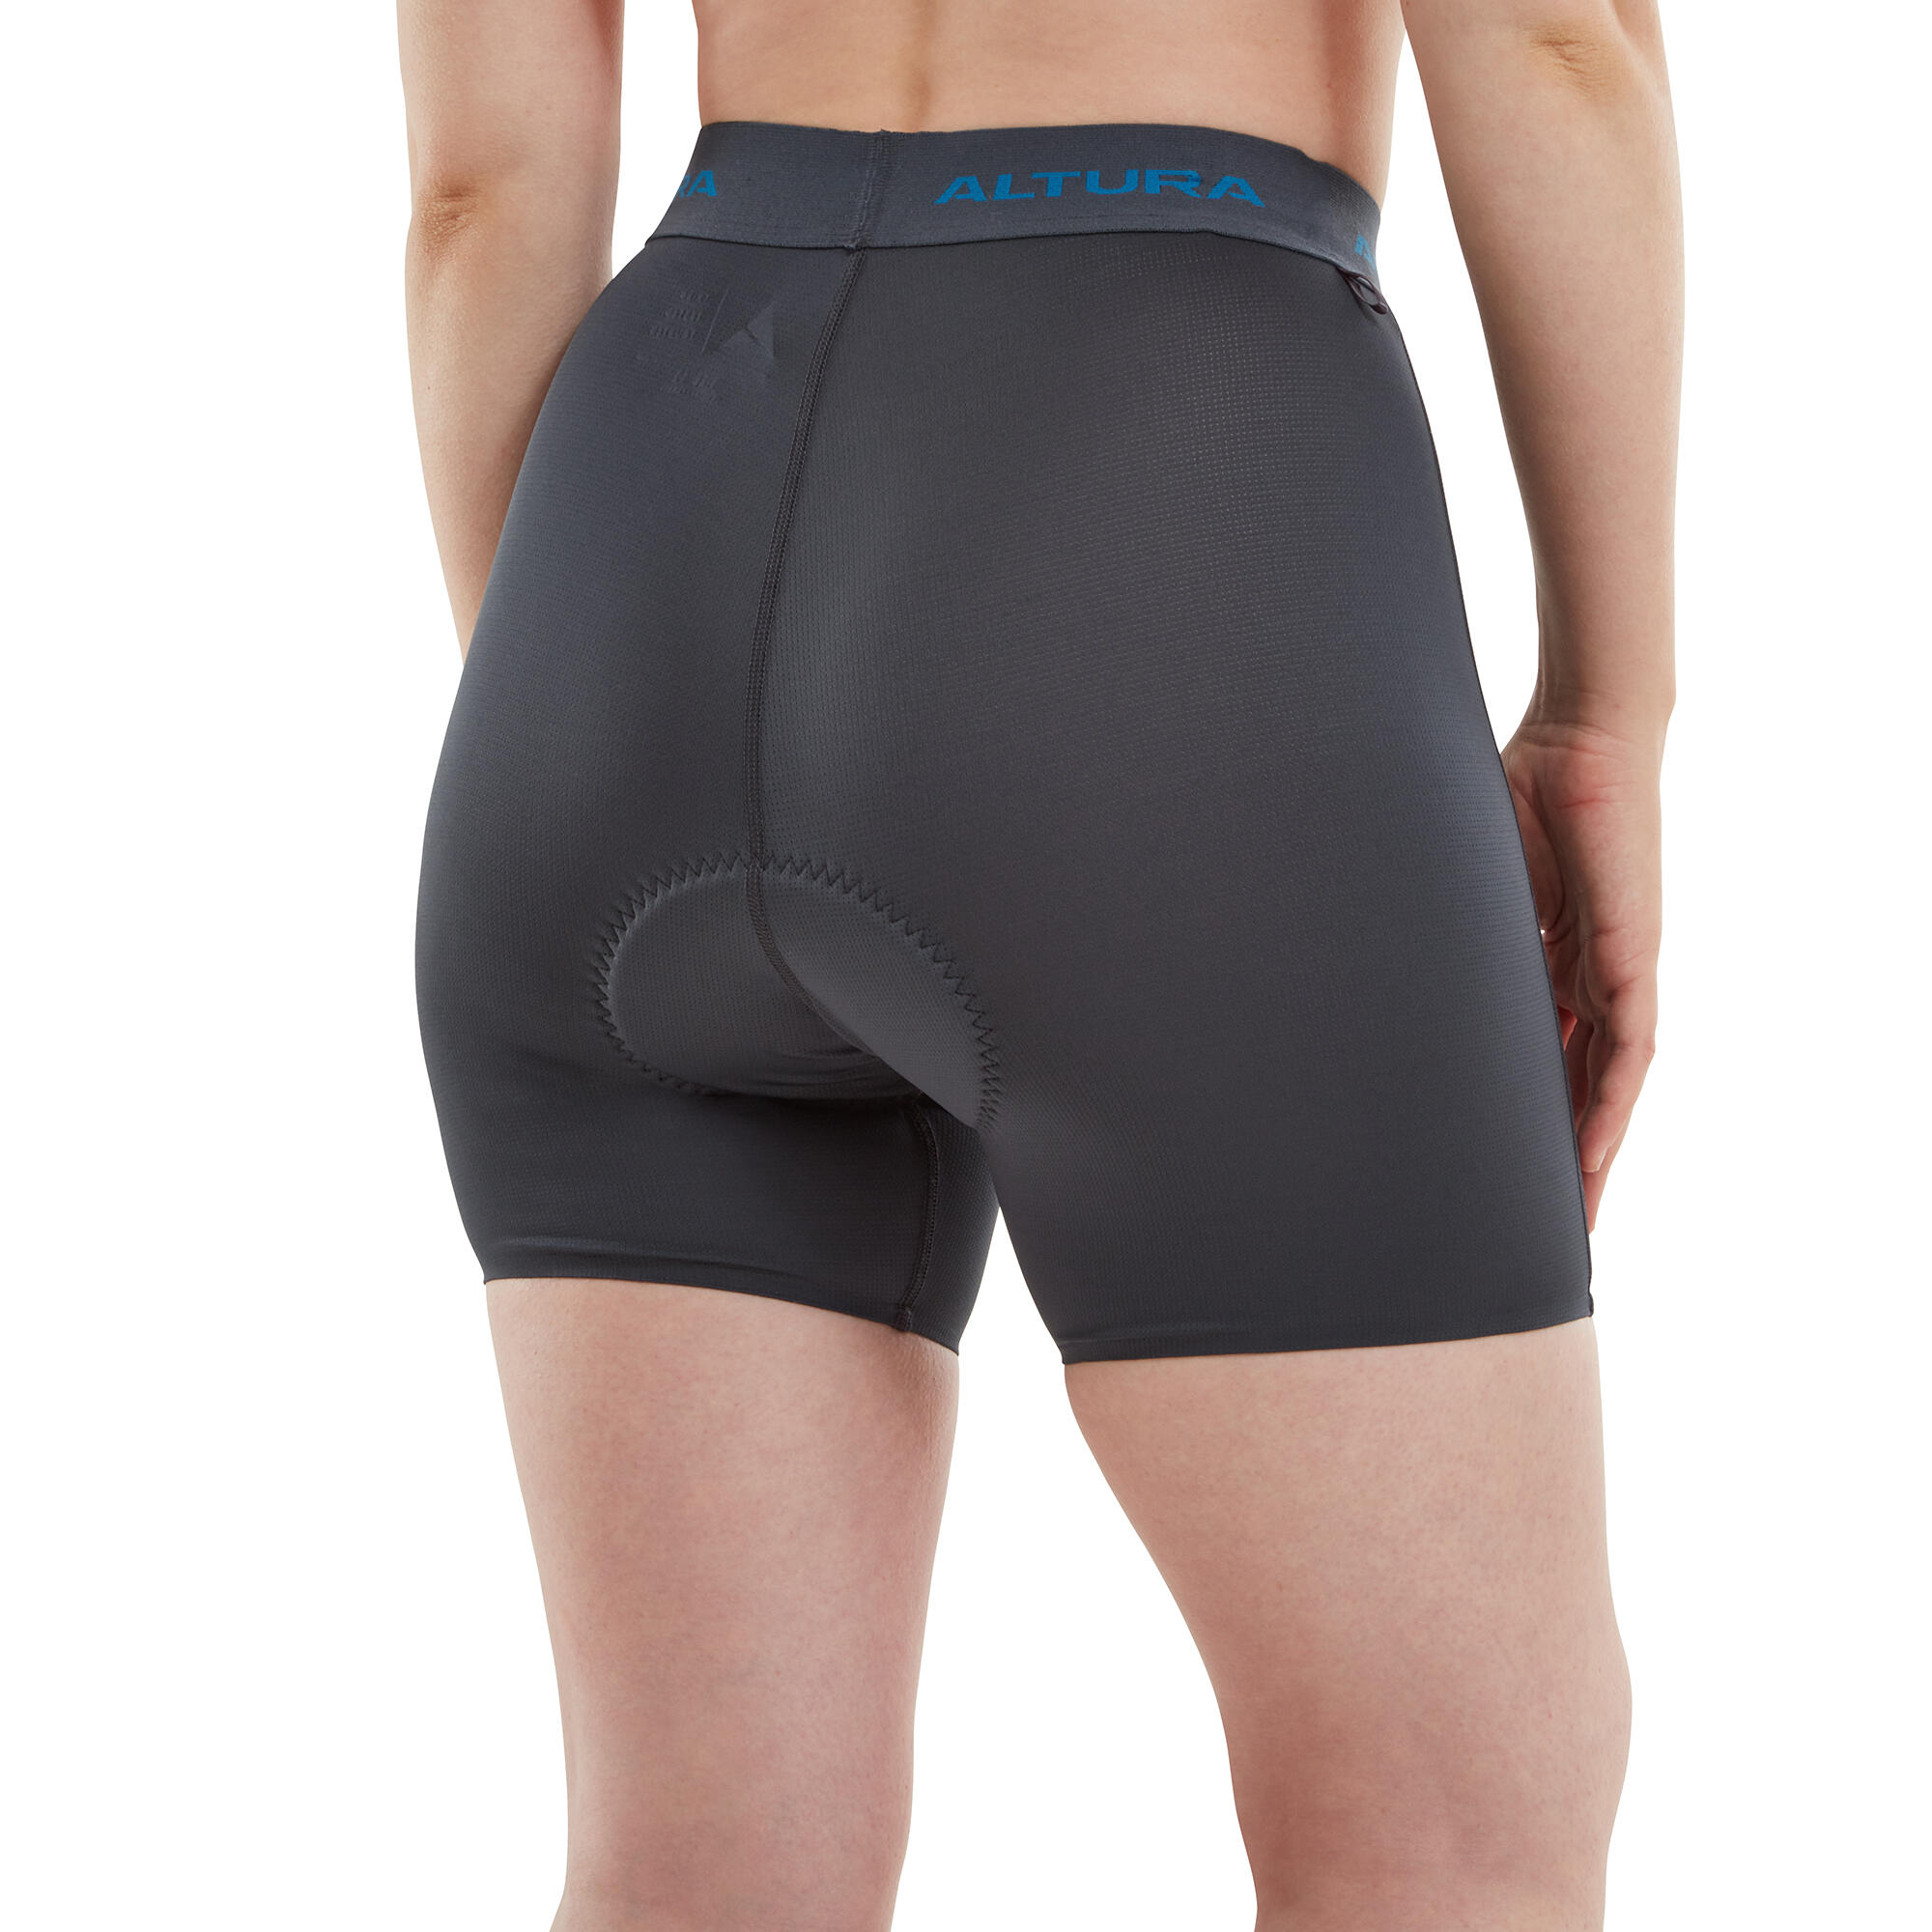 Tempo Women's Cycling Undershorts 2/4